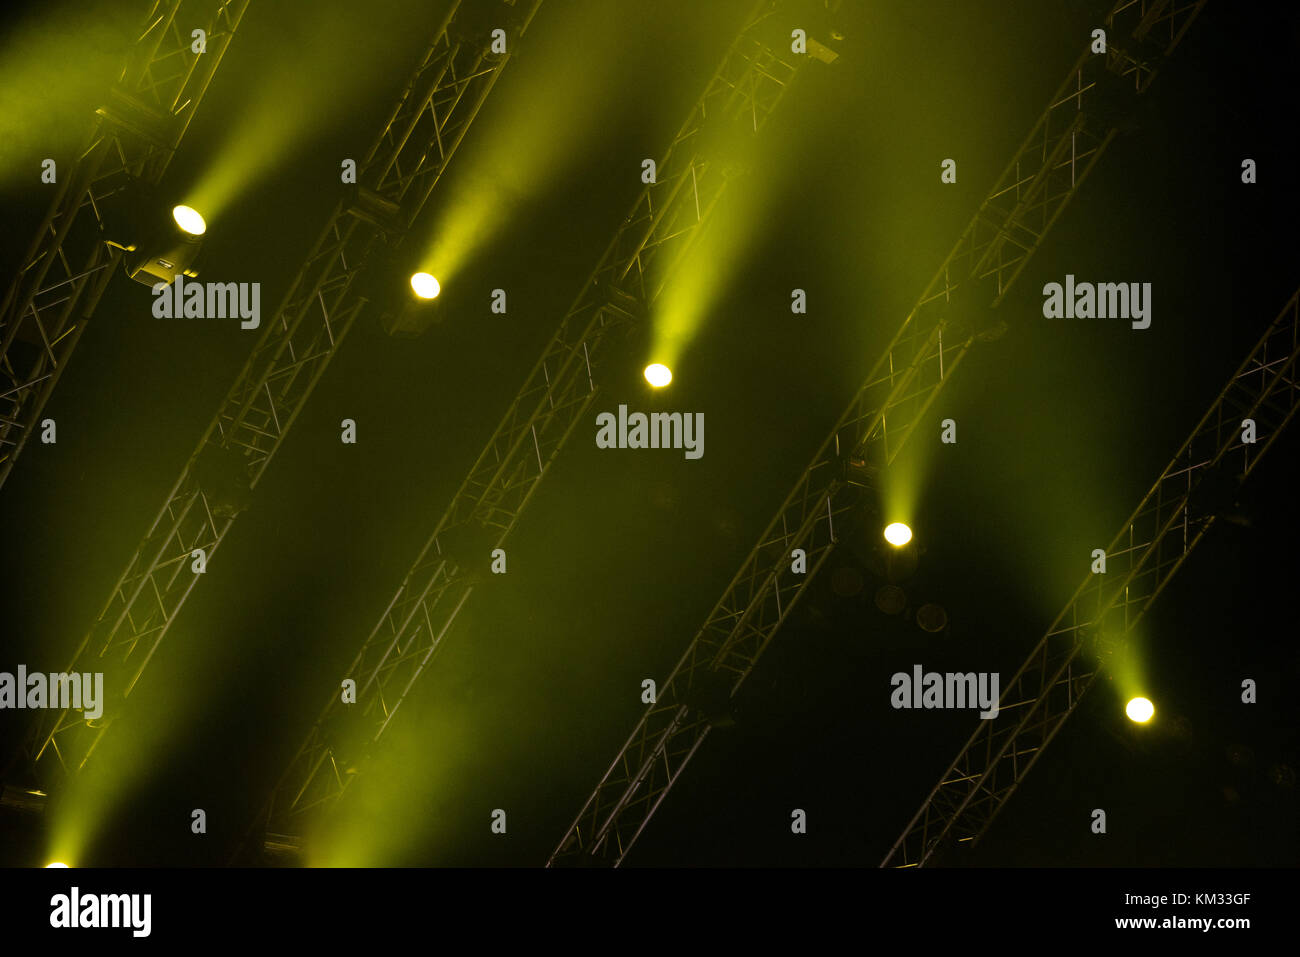 Green stage lights. Illumination with spotlights at a concert Stock Photo